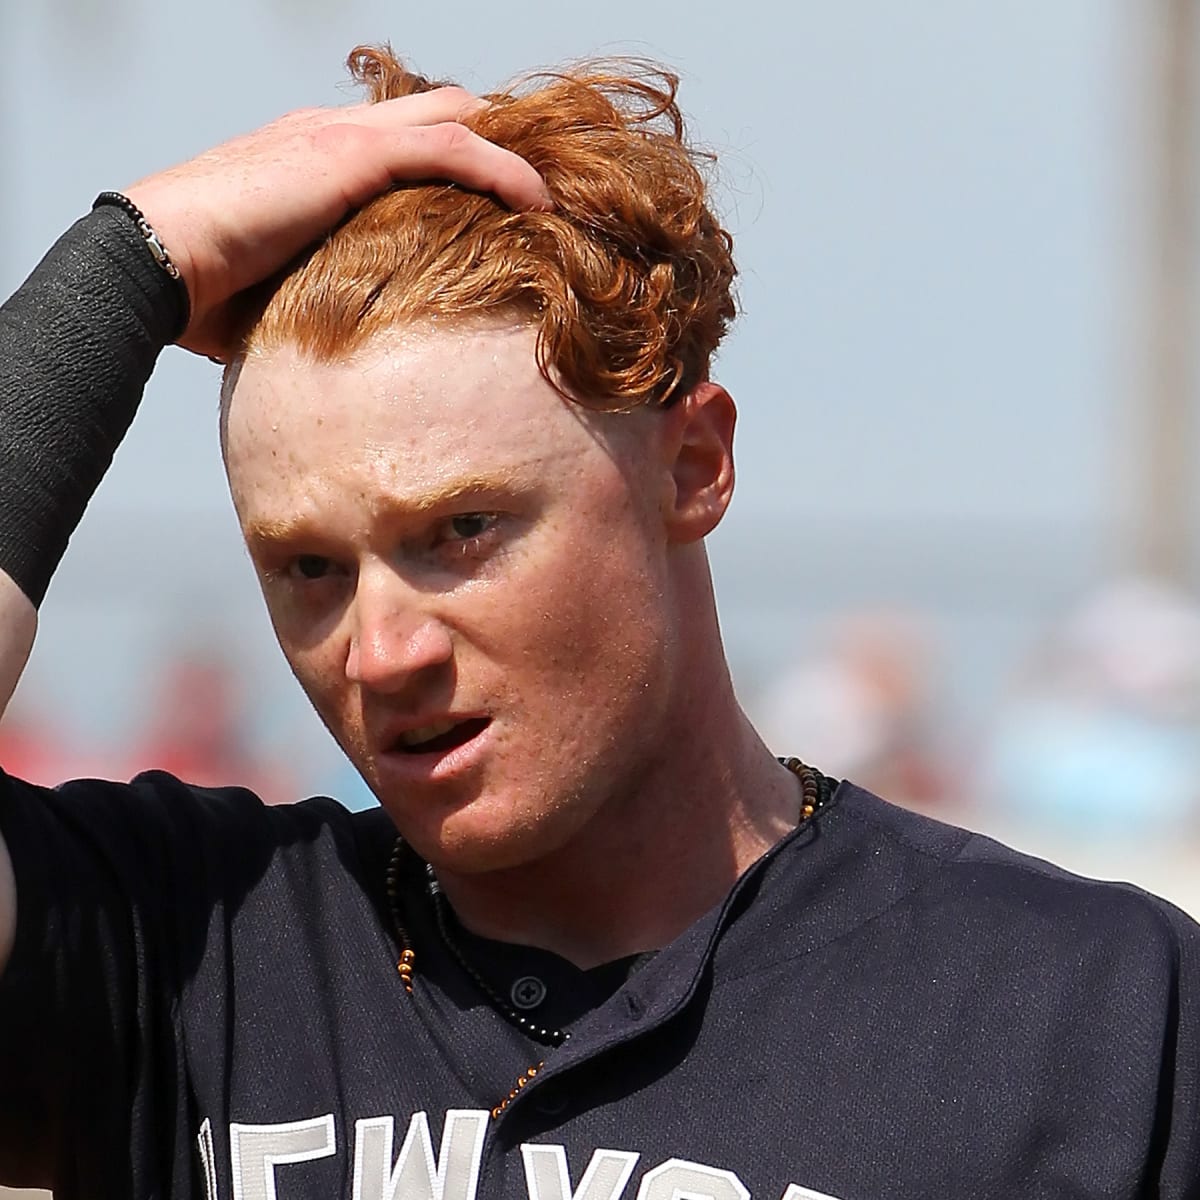 Yankees' Clint Frazier fires back at Mickey Mantle rumor 